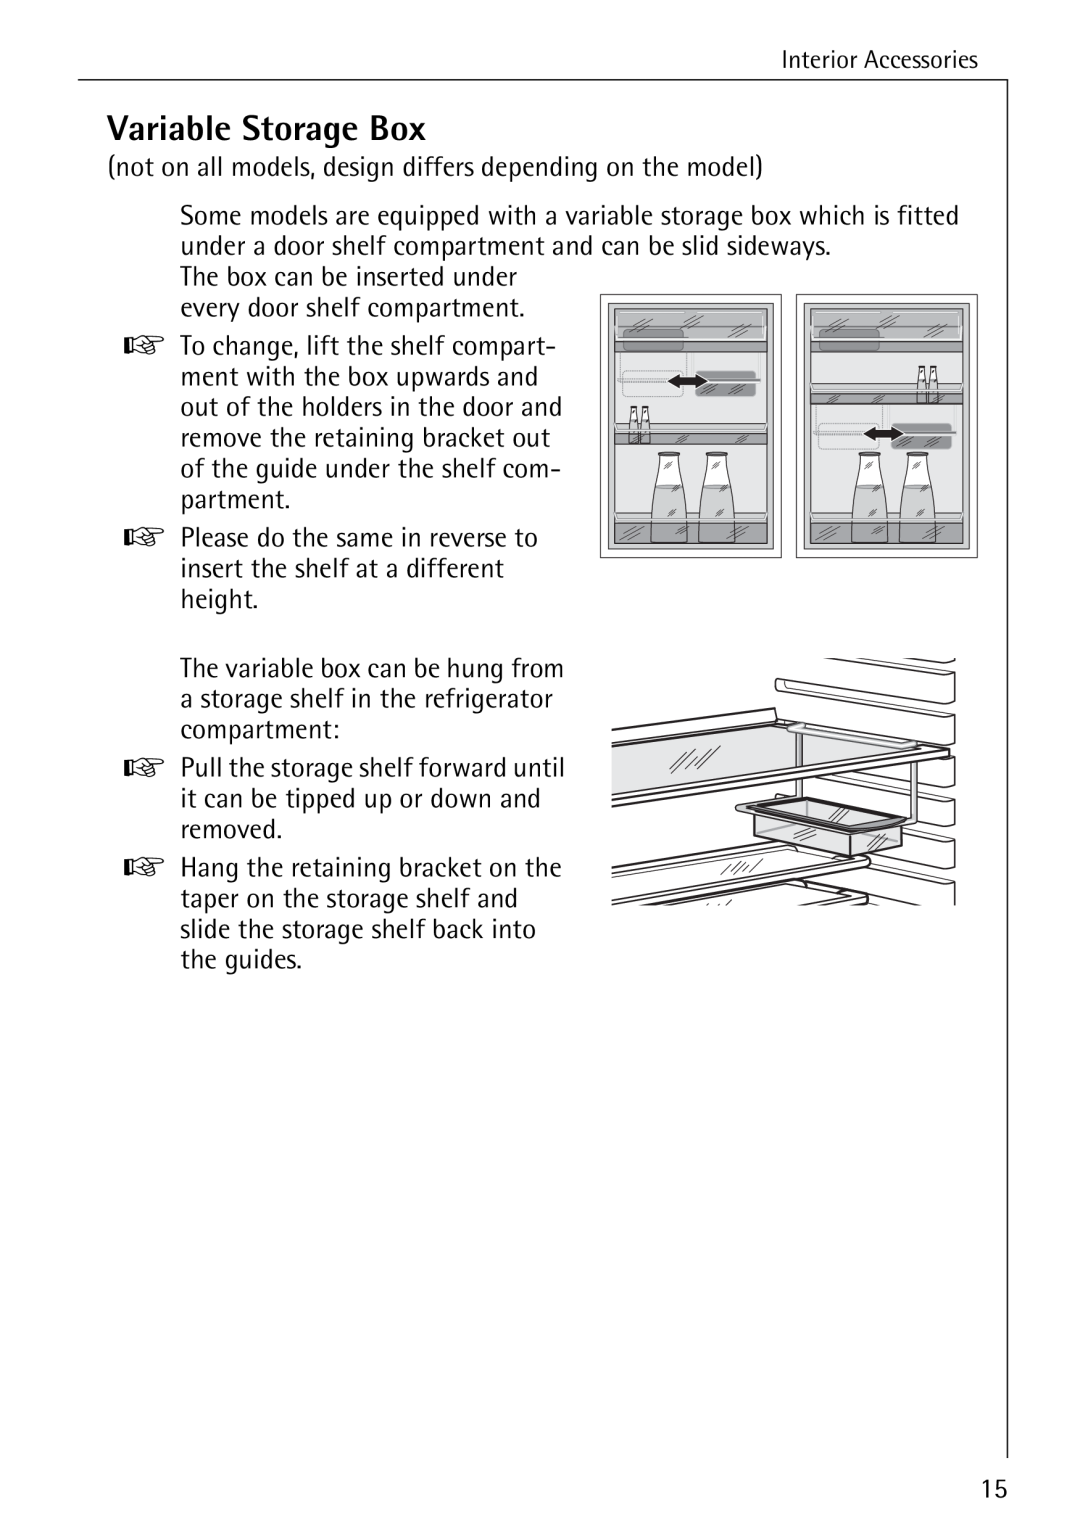 Electrolux Integrated operating instructions Variable Storage Box, Interior Accessories 